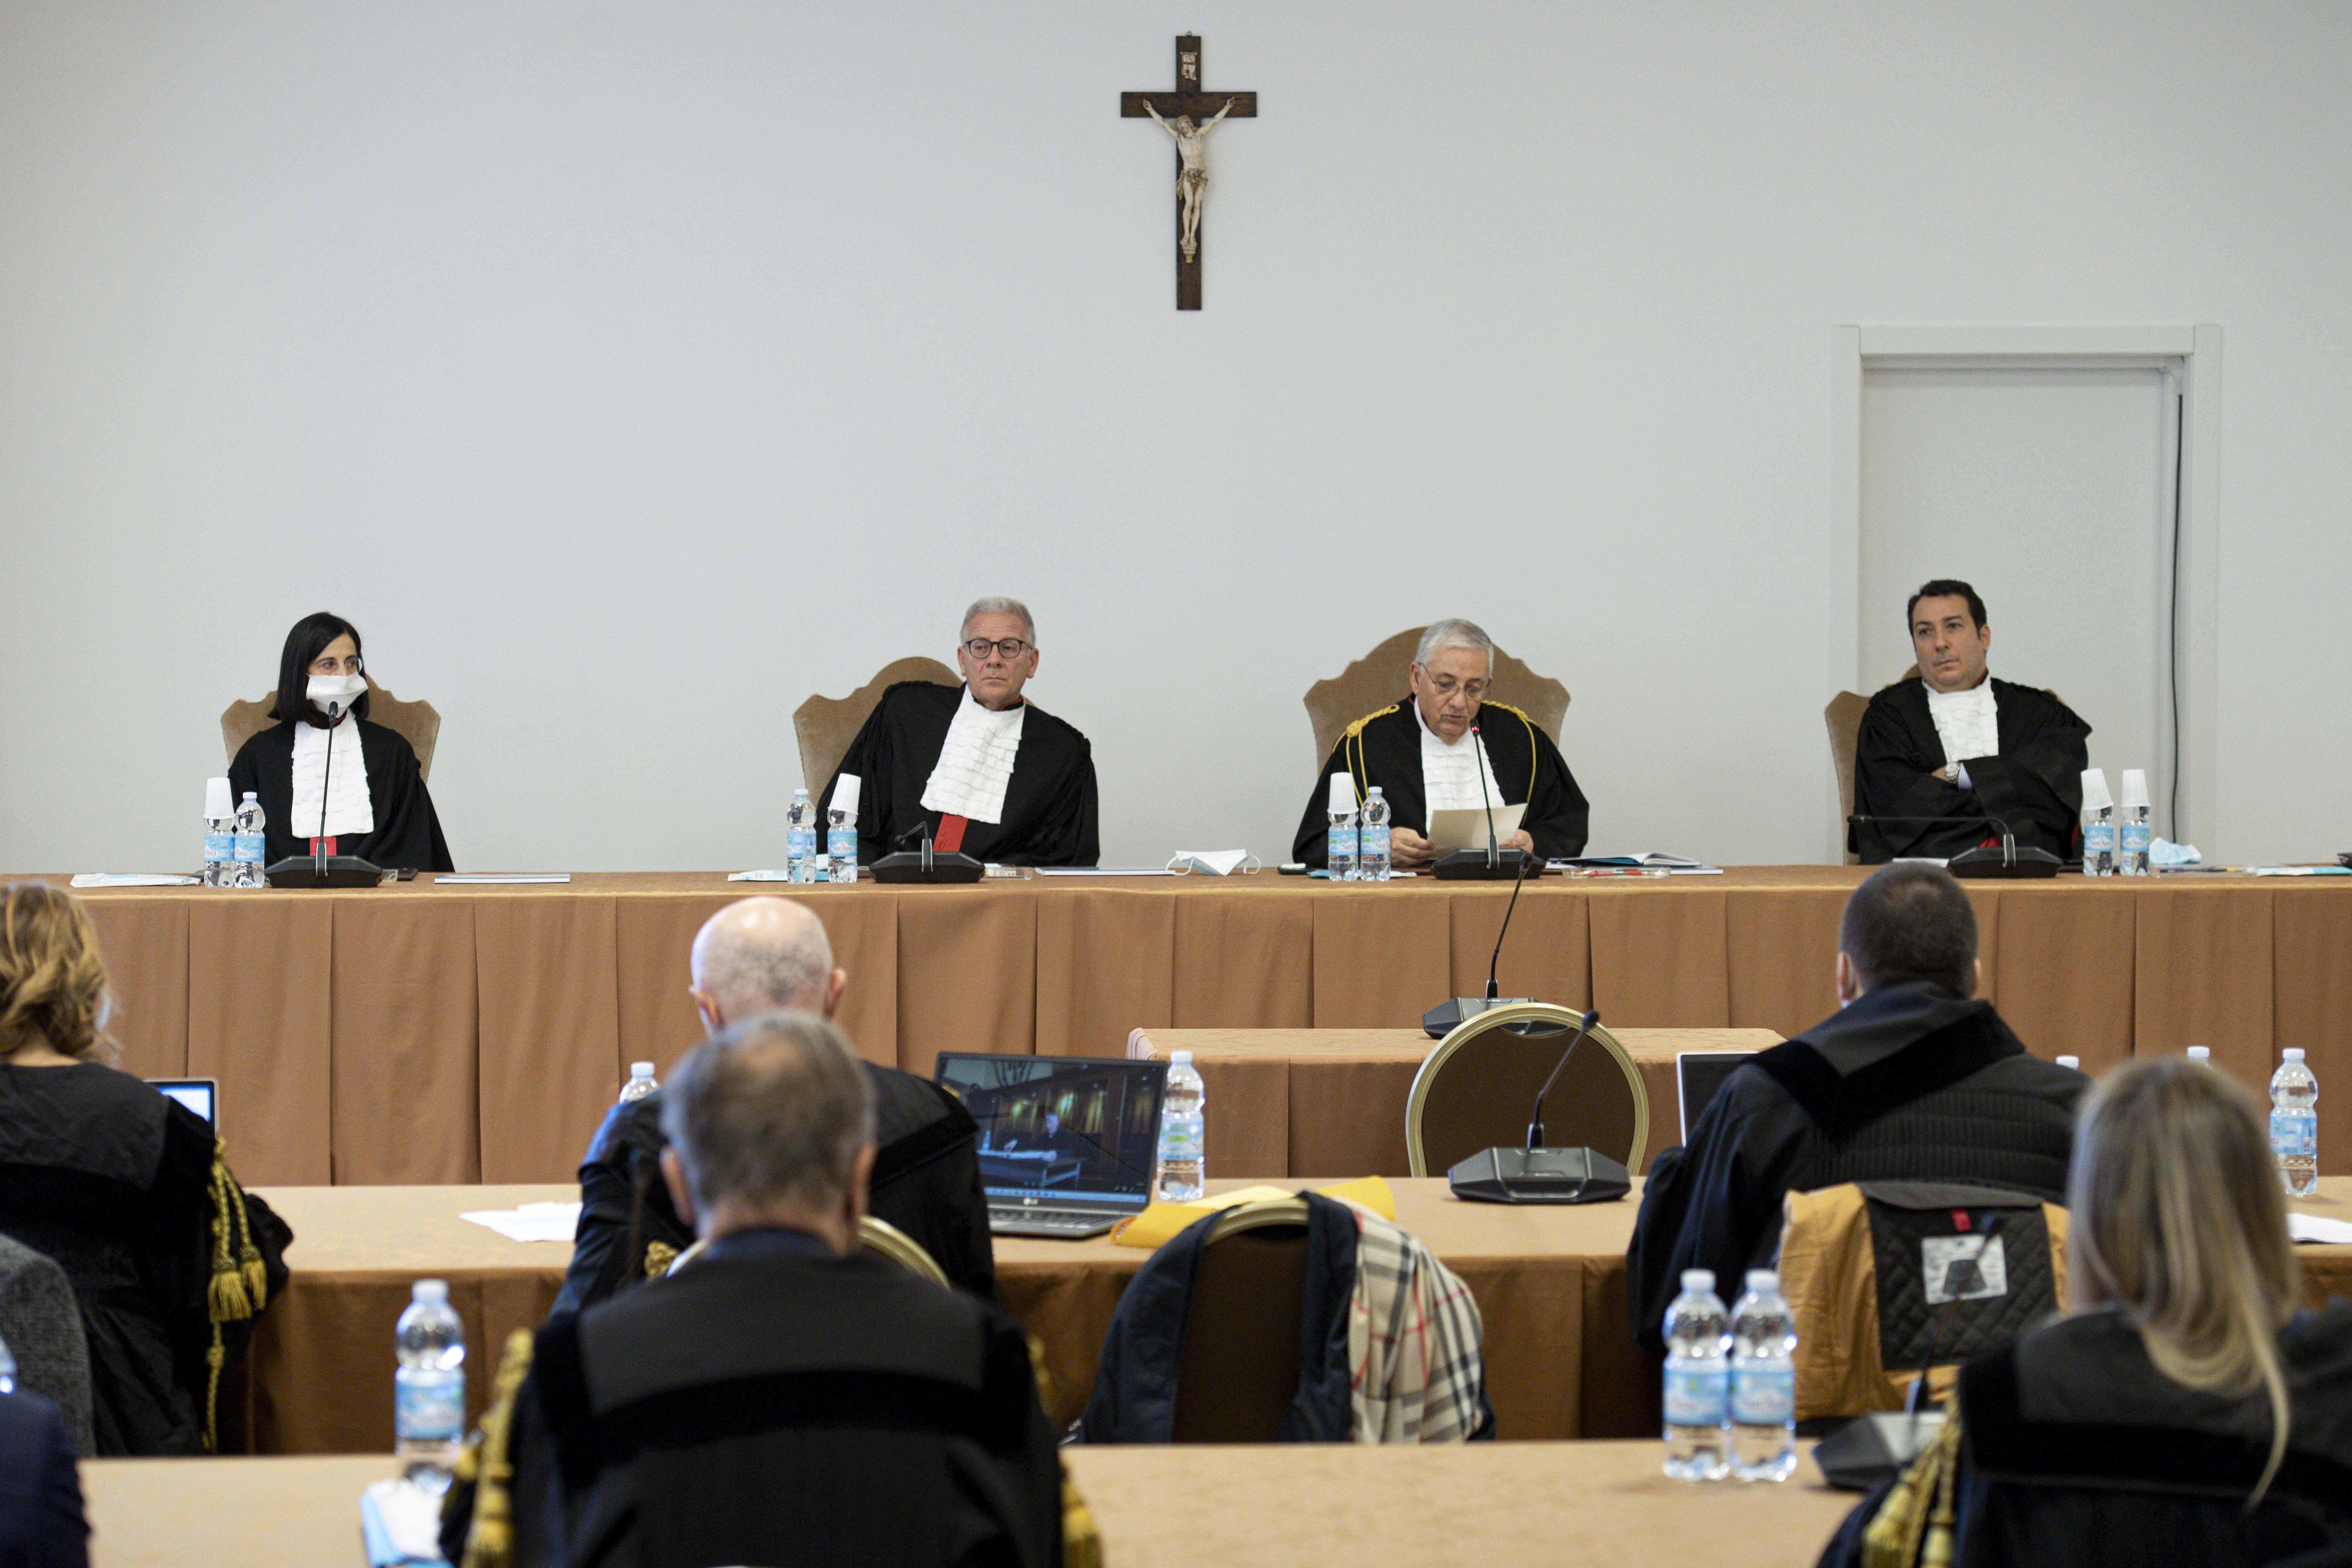 Vatican judges preside over the third session of the trial of six defendants accused of financial crimes, including Cardinal Angelo Becciu, at the Vatican City State criminal court in this Nov. 17, 2021. Pictured from left are judges Lucia Bozzi, Venerand